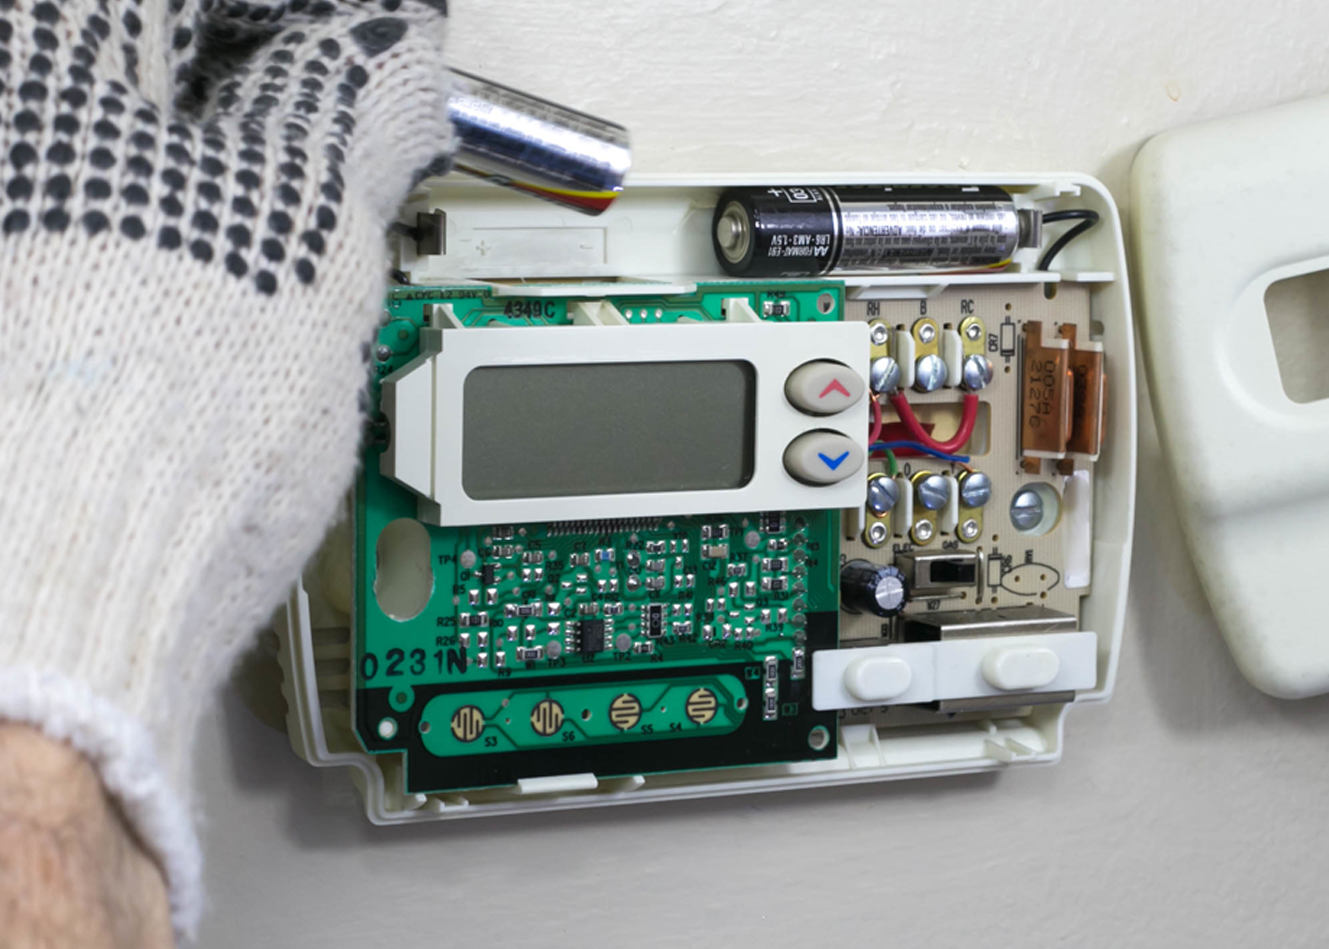 How To Change The Batteries In Your Thermostat 